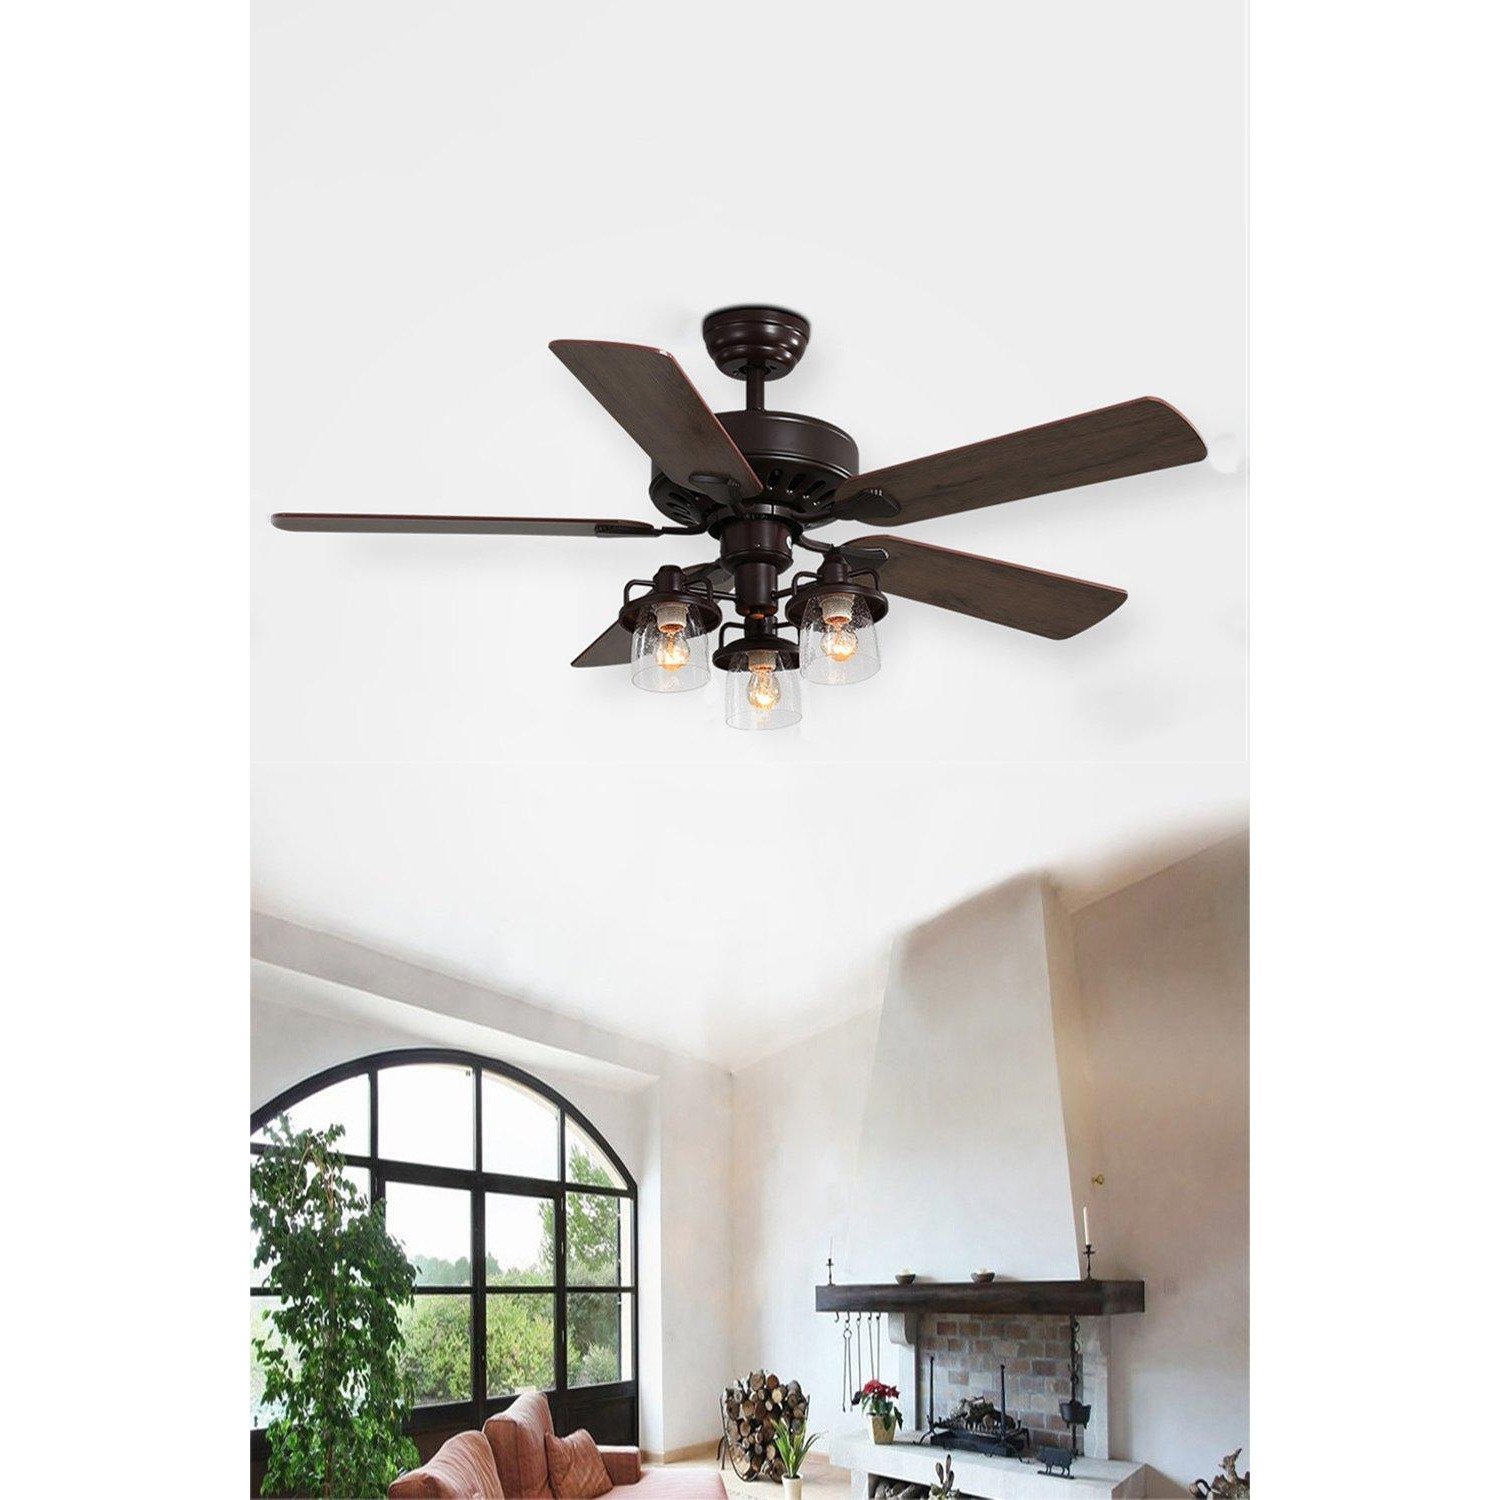 5 Blade Pull Chain Ceiling Fan Light - image 1